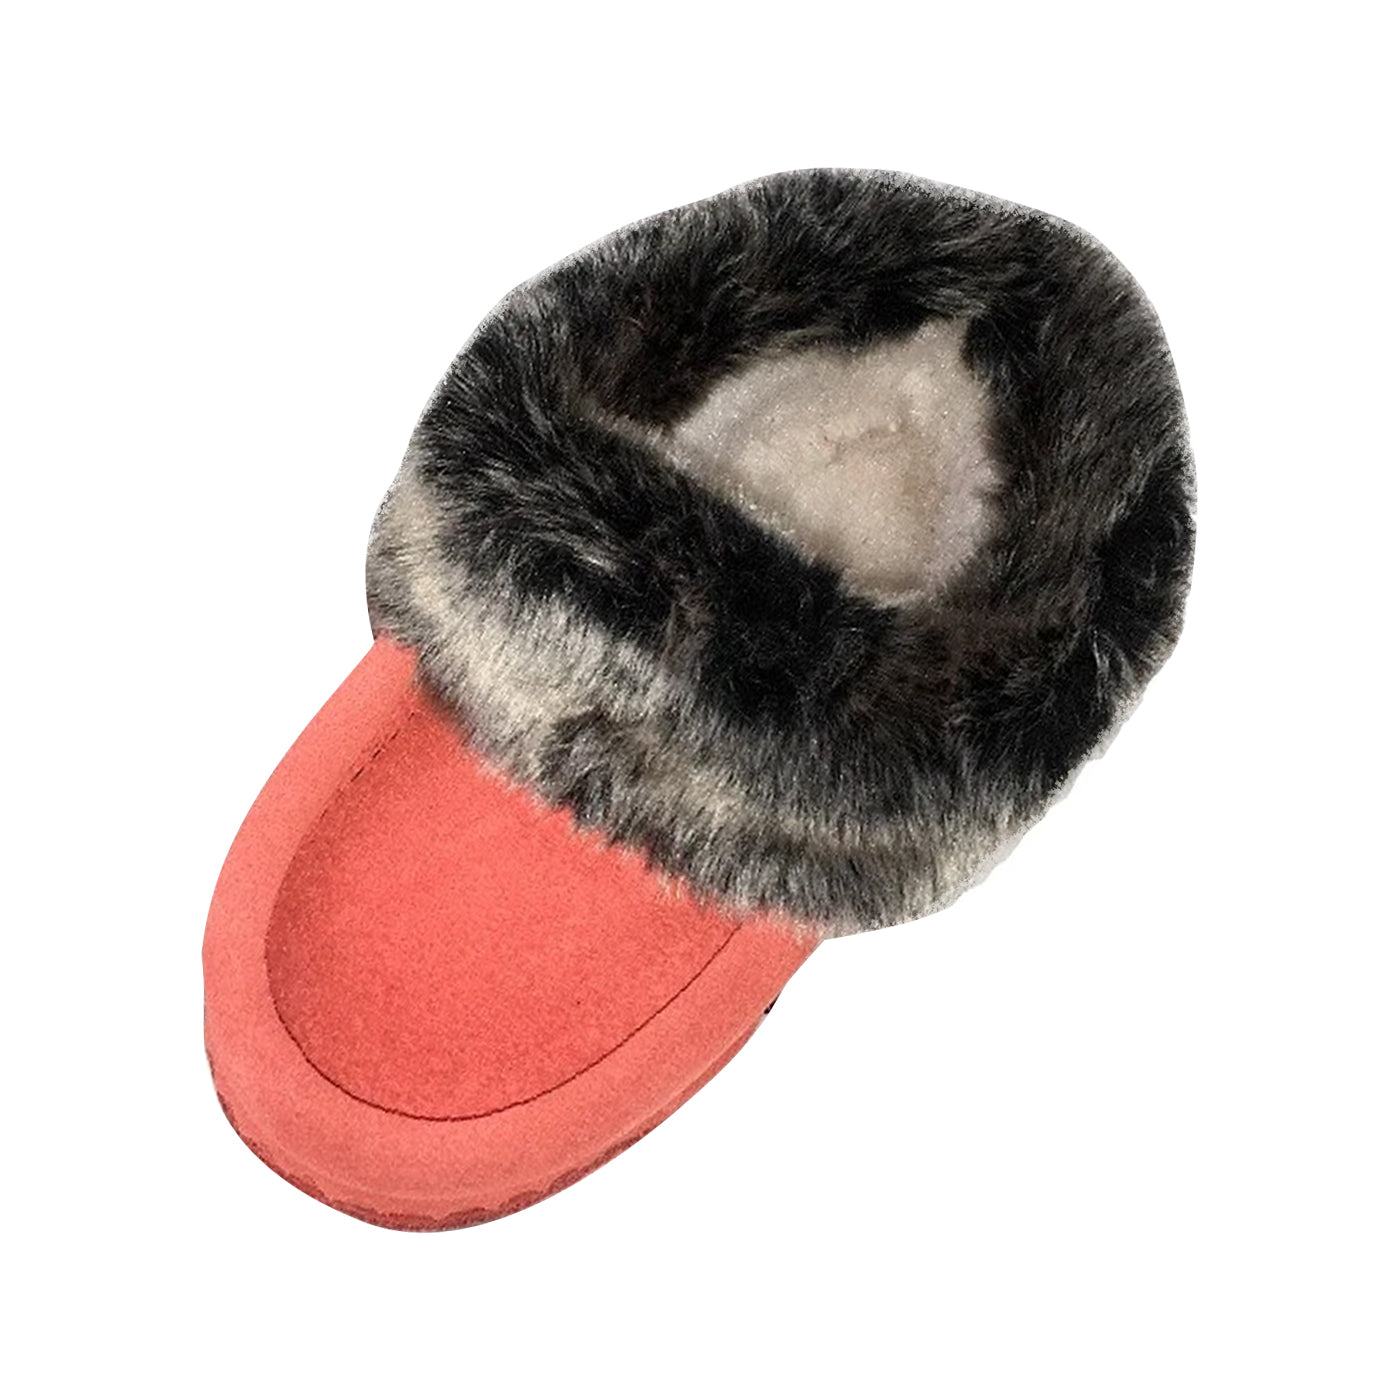 Children's Lined Faux Fur Moccasins (Final Clearance)